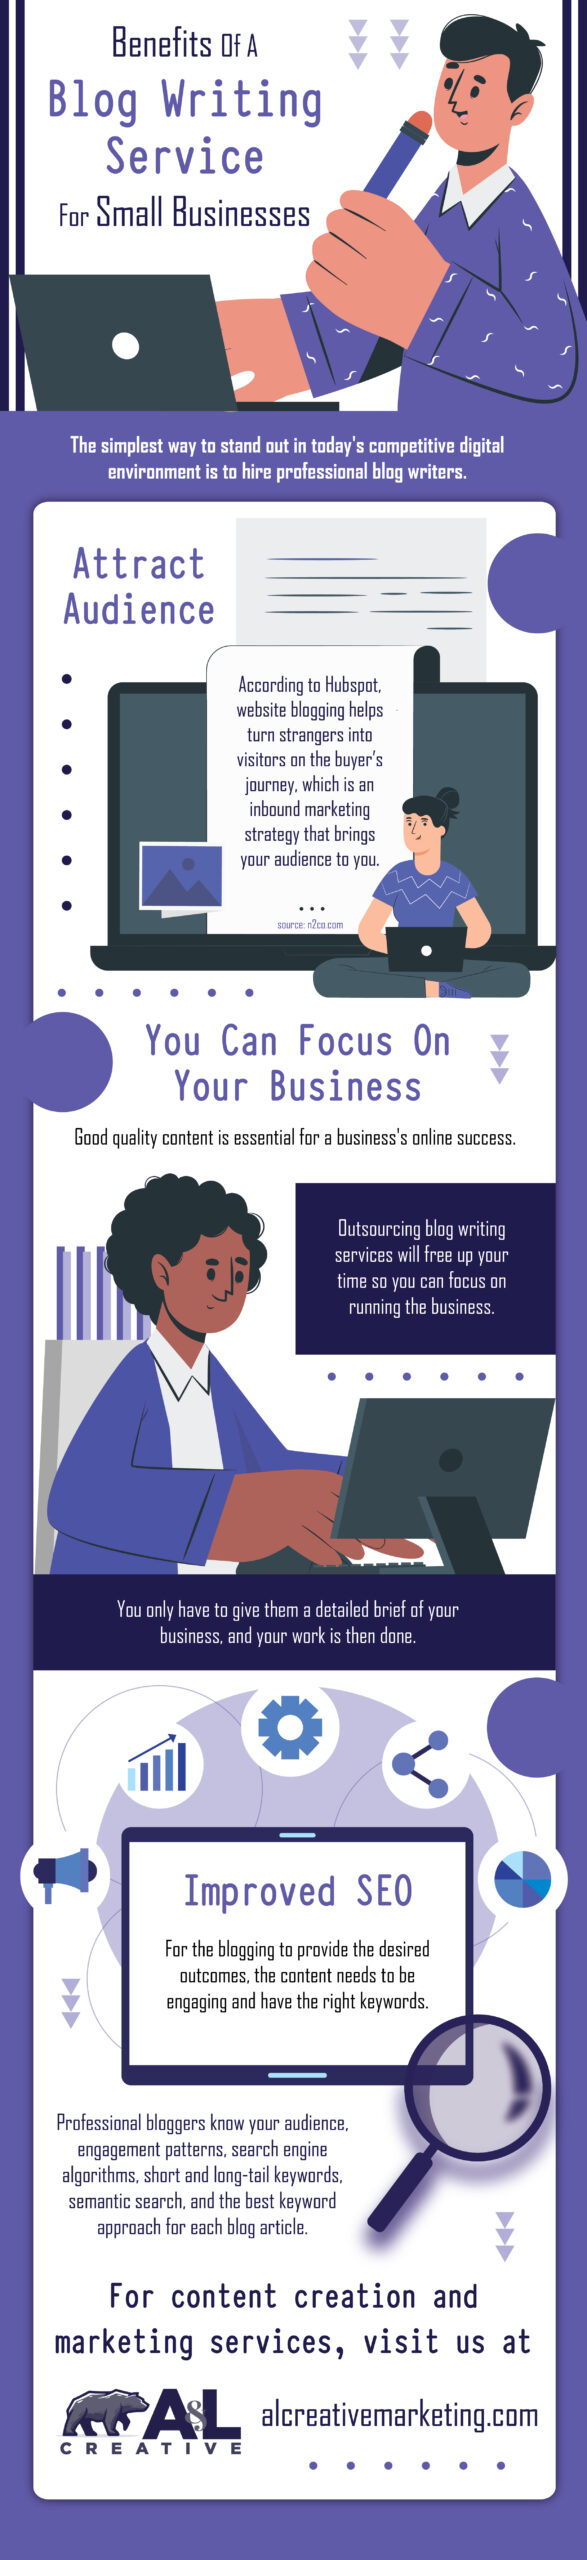 Benefits of a Blog Writing Service for Small Businesses - Infograph